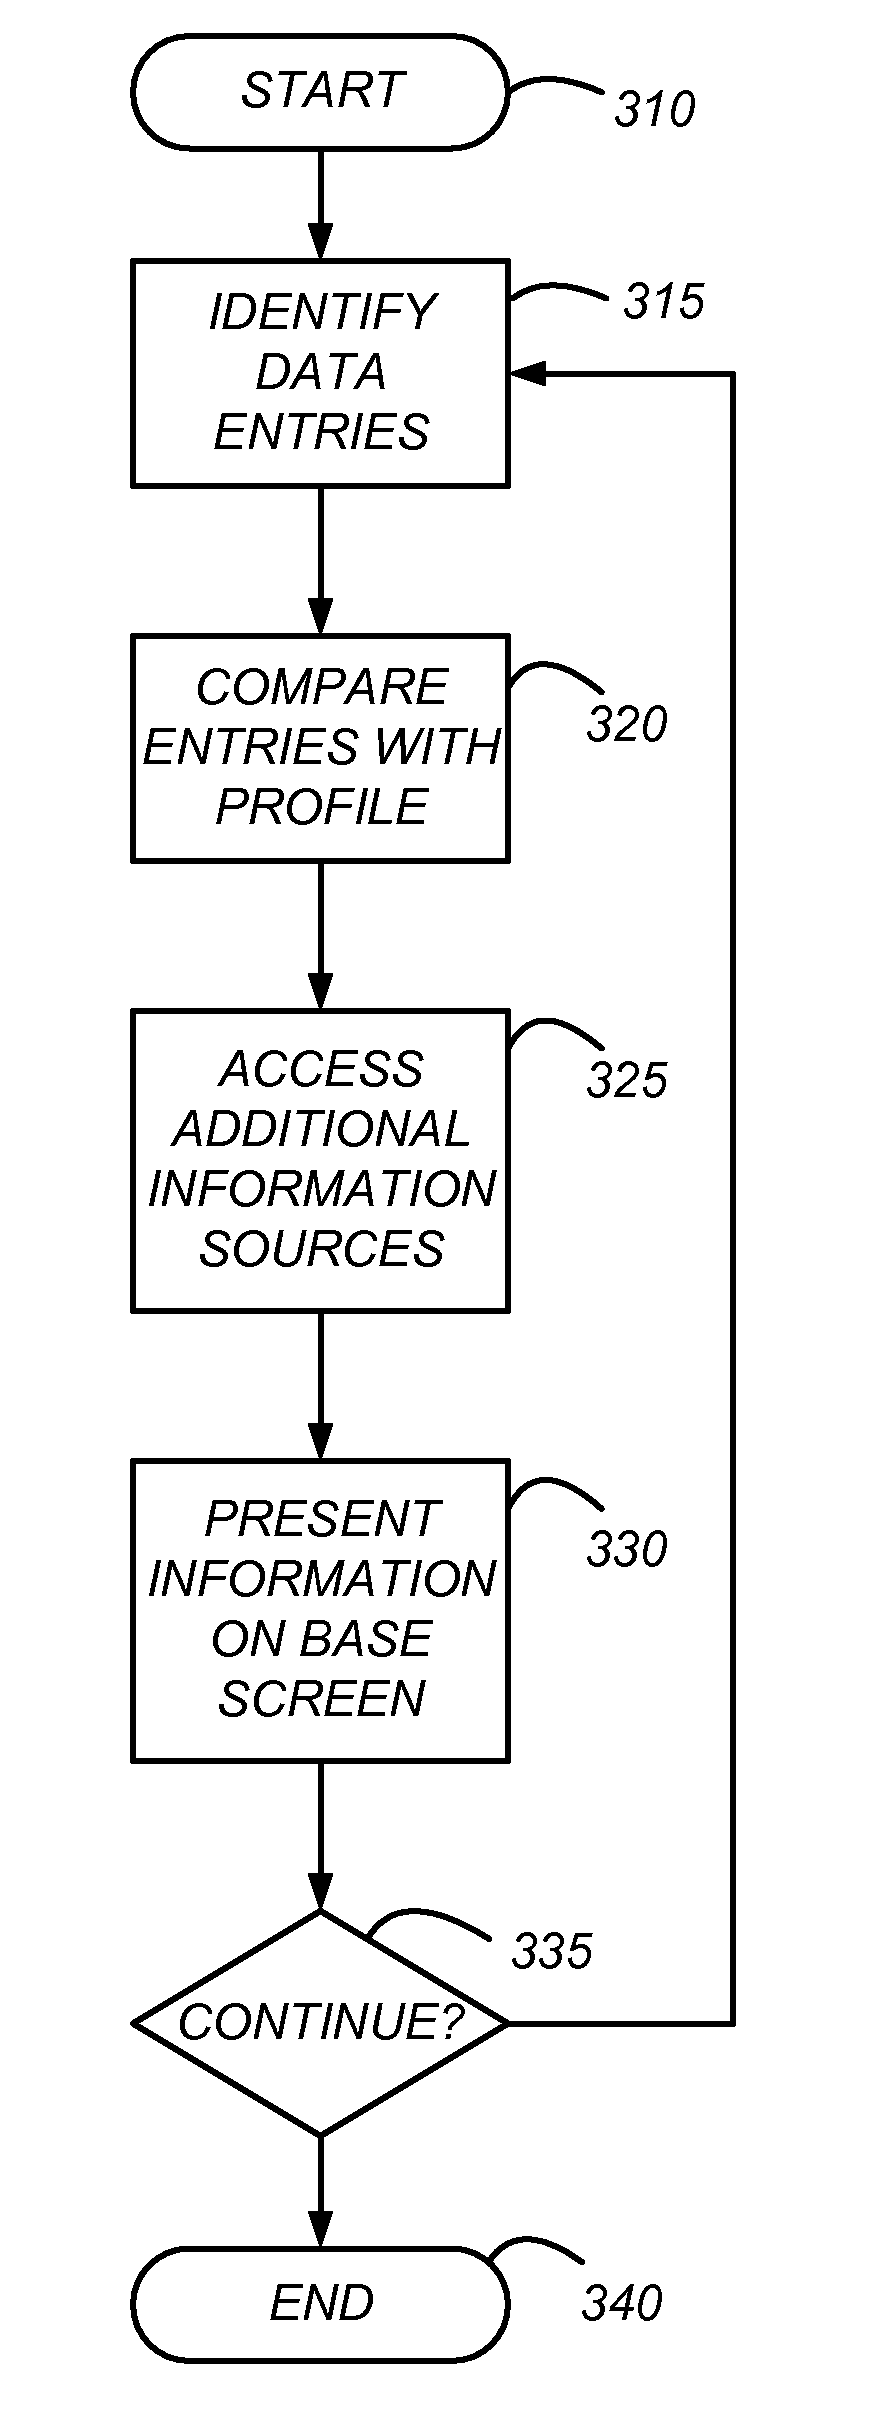 Display of Information of Interest